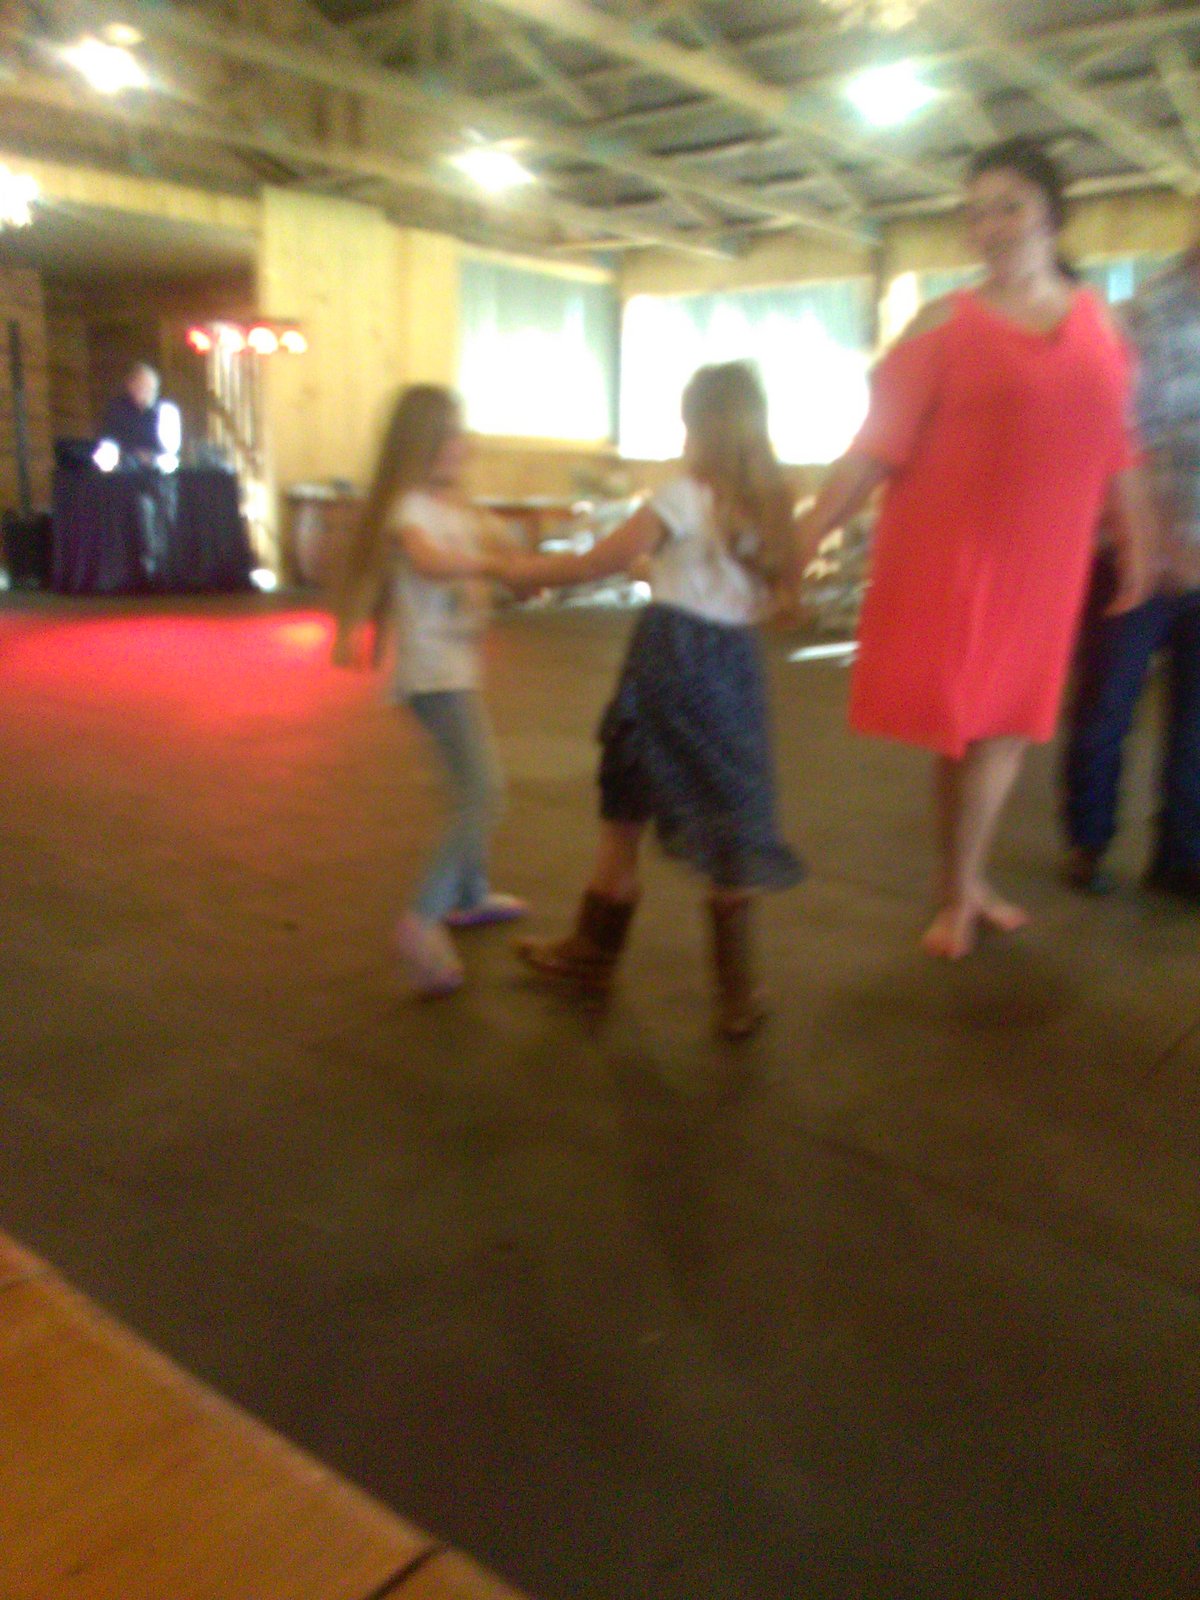 Jennifer and her cousin dancing